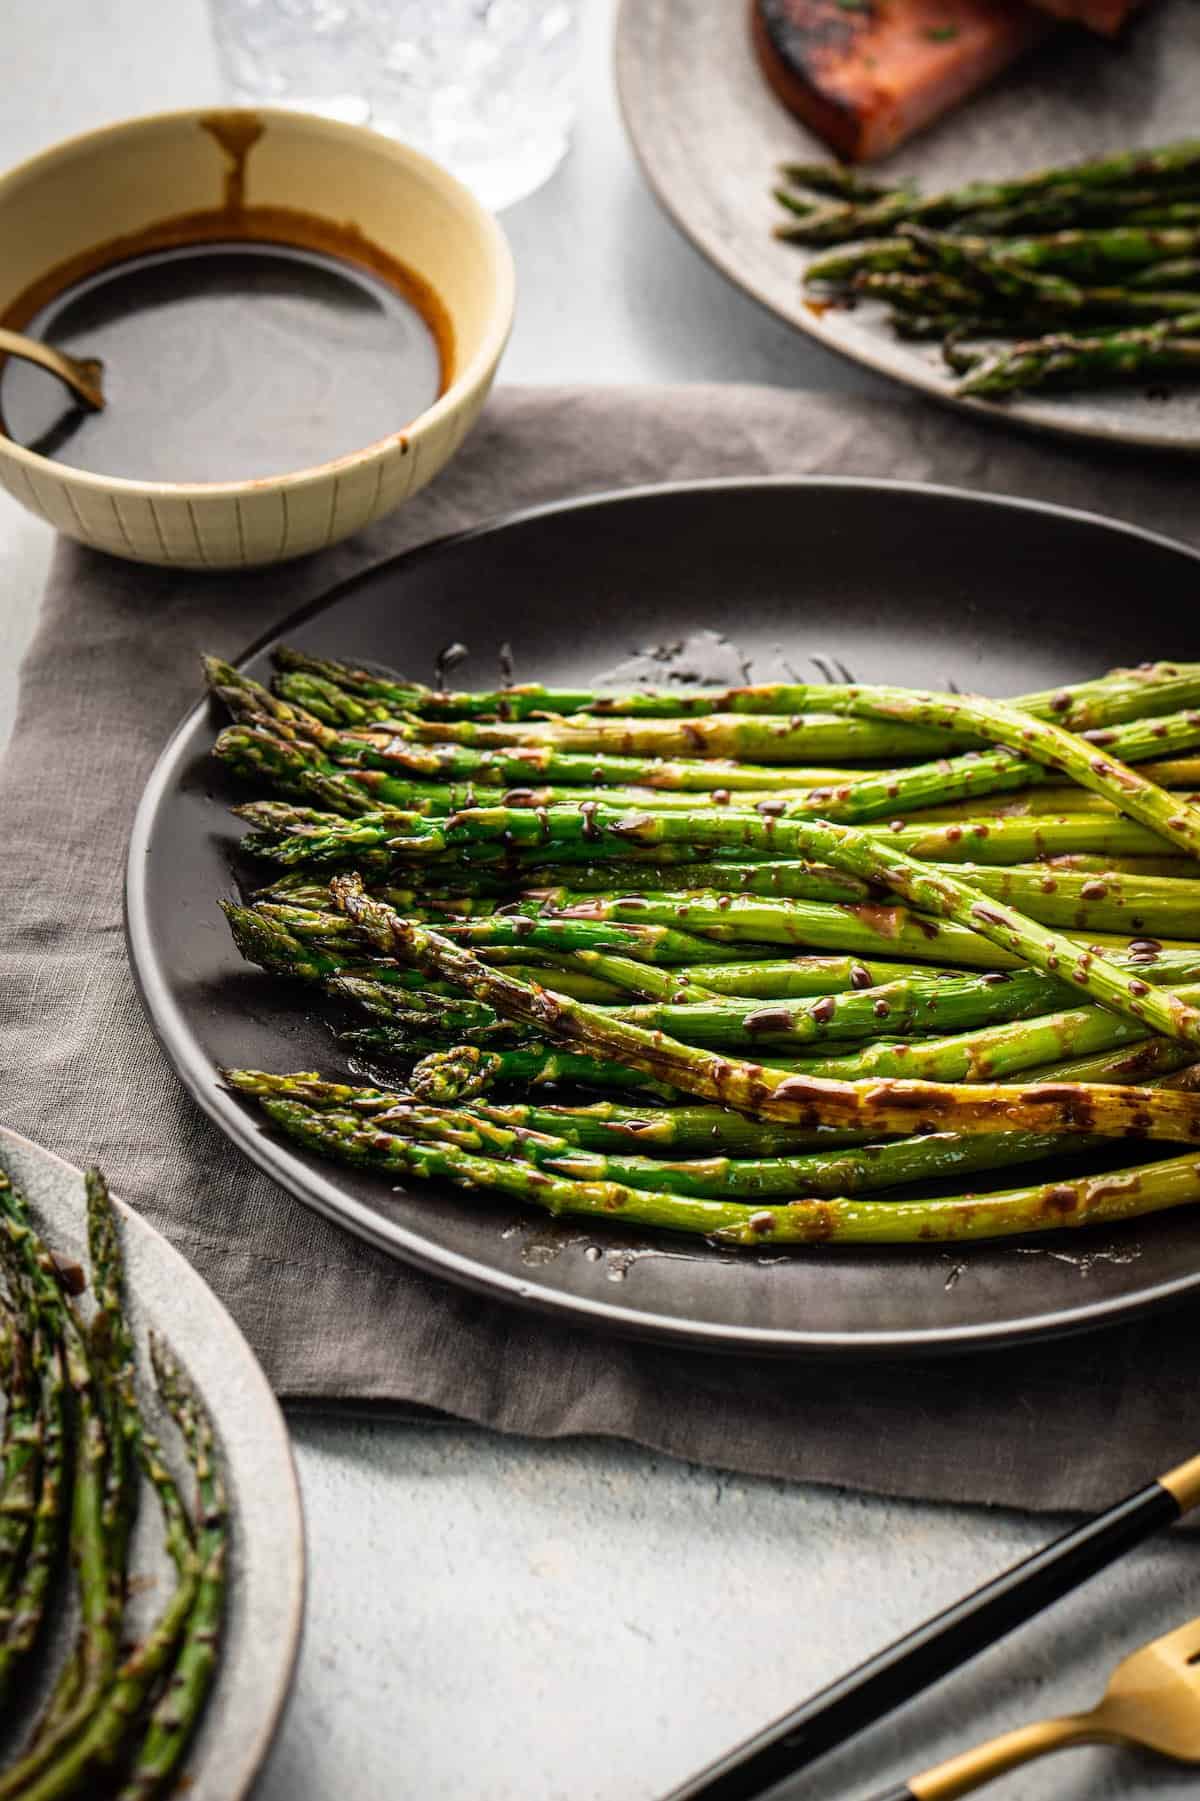 Grilled asparagus with sauce on a plate.